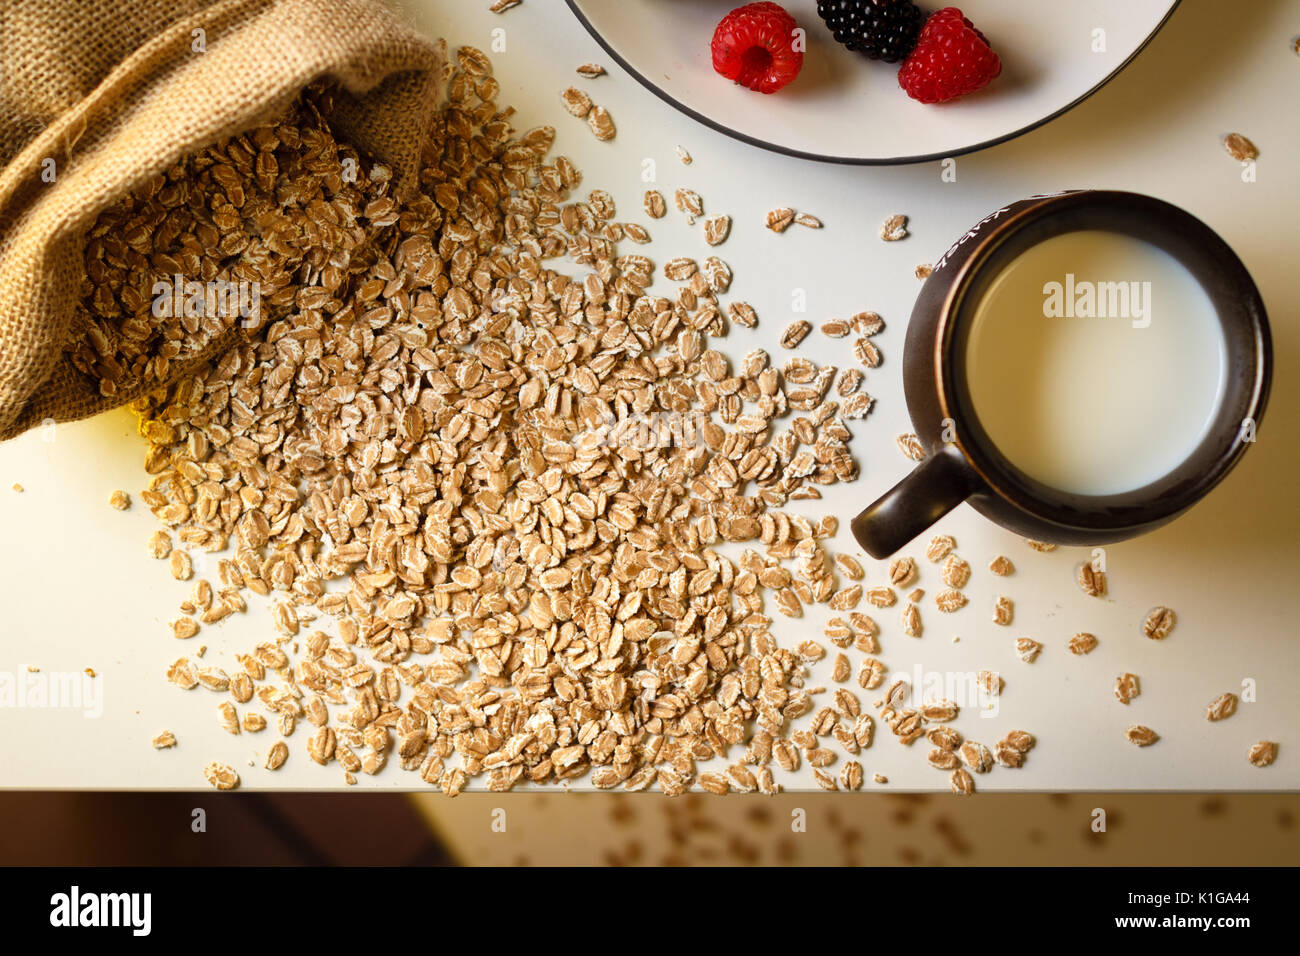 Mess breakfast: scattered oat cereal, milk in cup, blackberry and raspberry on plate, top view. Stock Photo